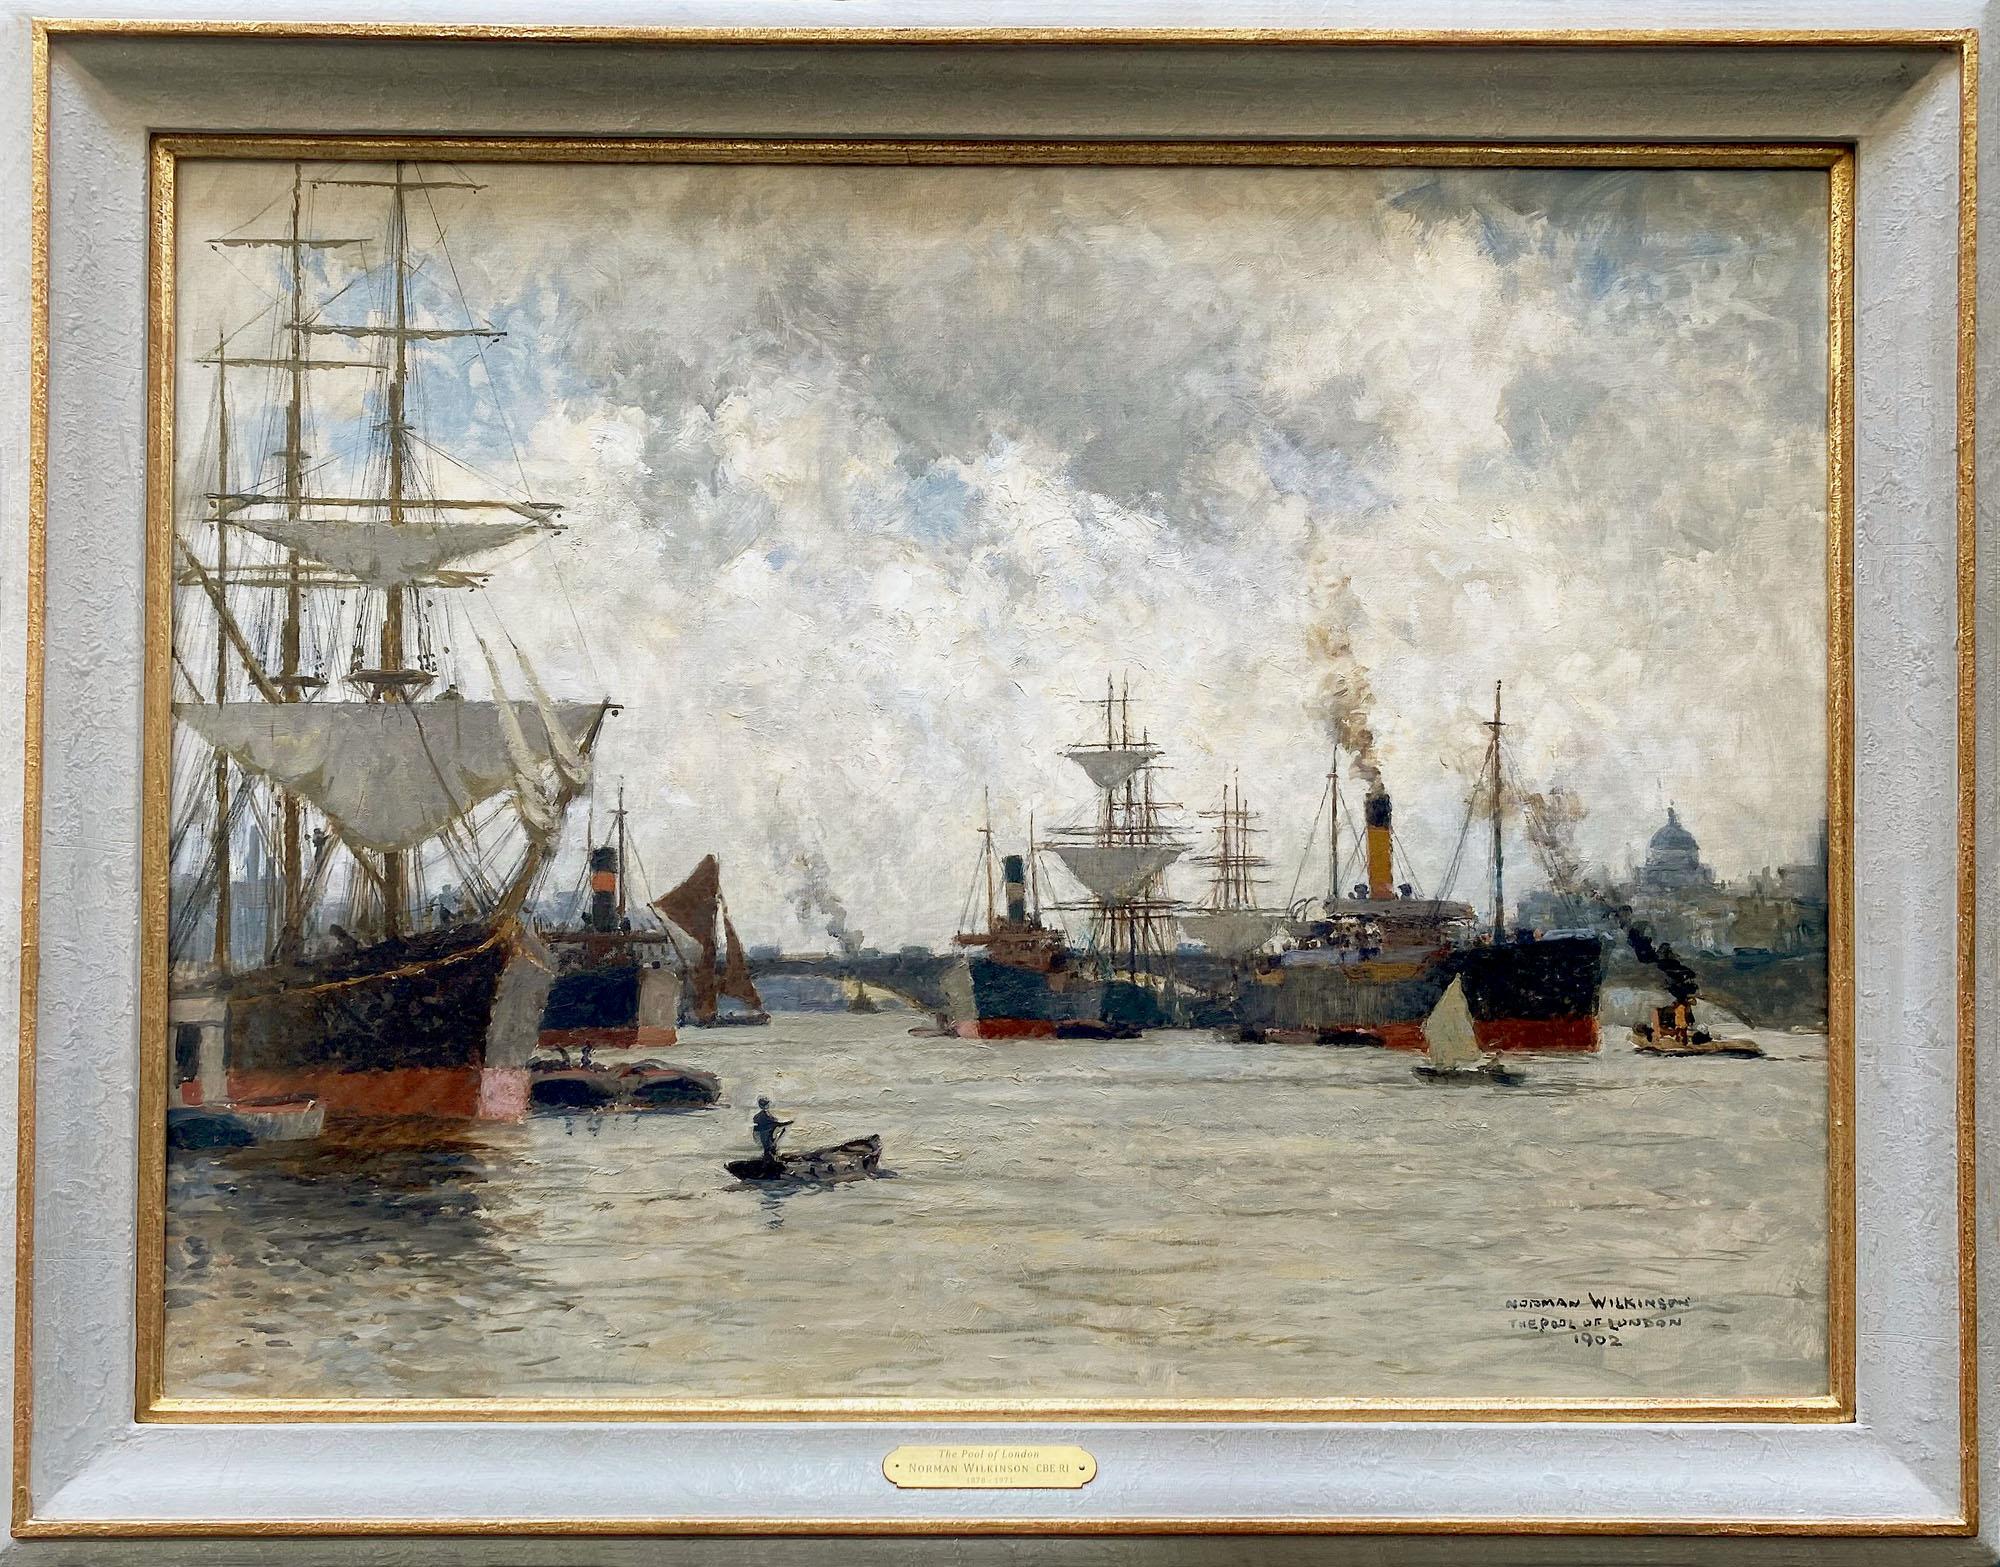 The Pool of London - Painting by Norman Wilkinson CBE PRI